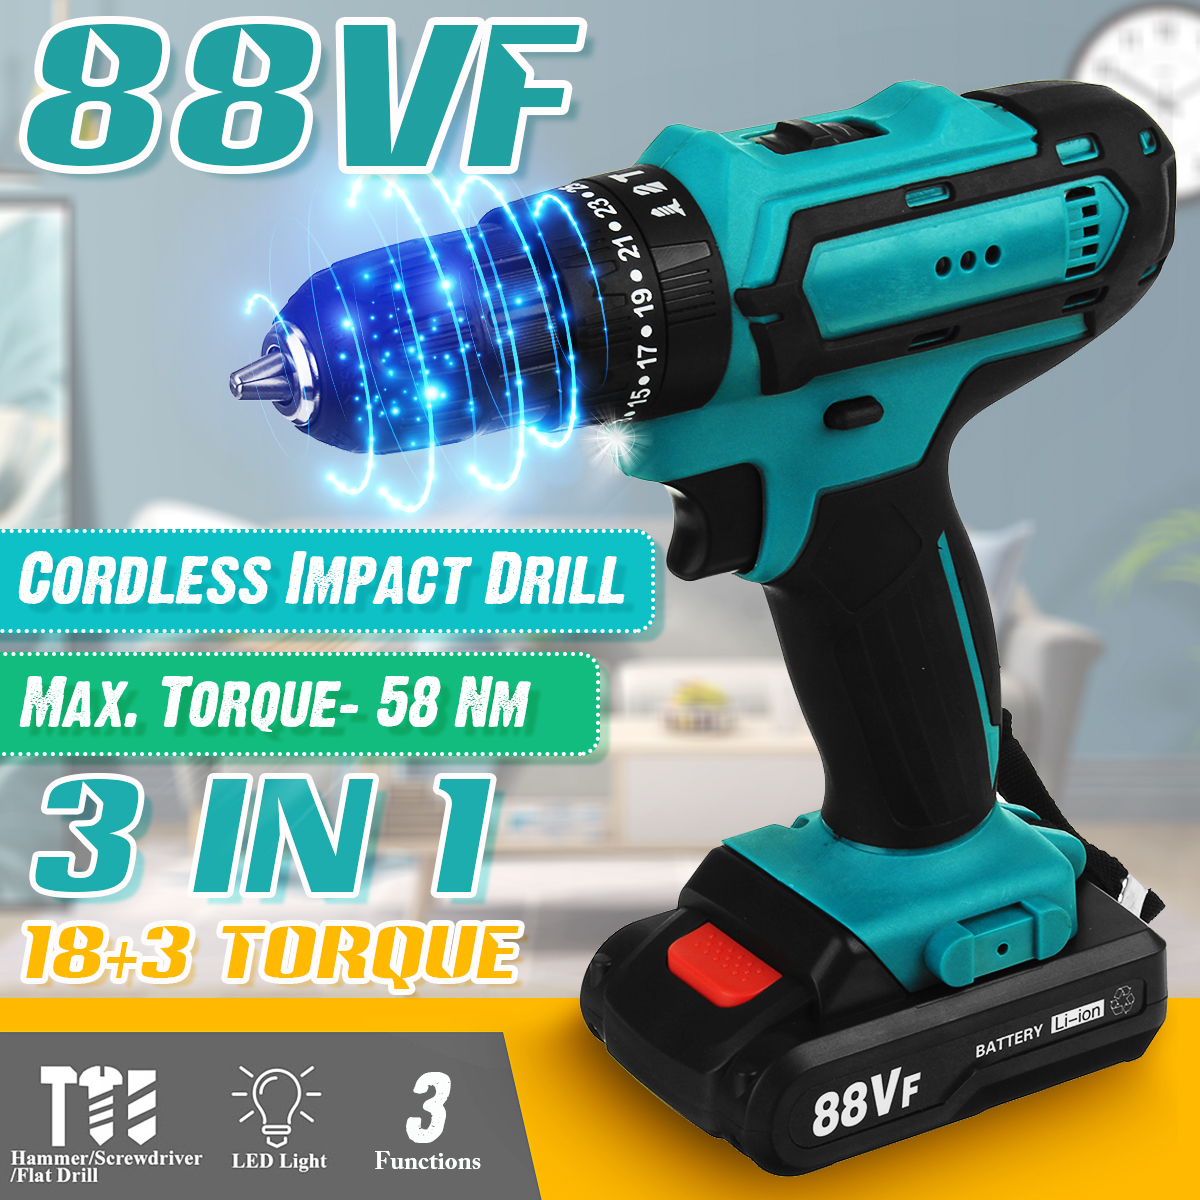 88VF-Cordless-Drill-3-IN-1-Electric-Screwdriver-Hammer-Impact-Drill-7500mAh-2-Speed-1787578-2